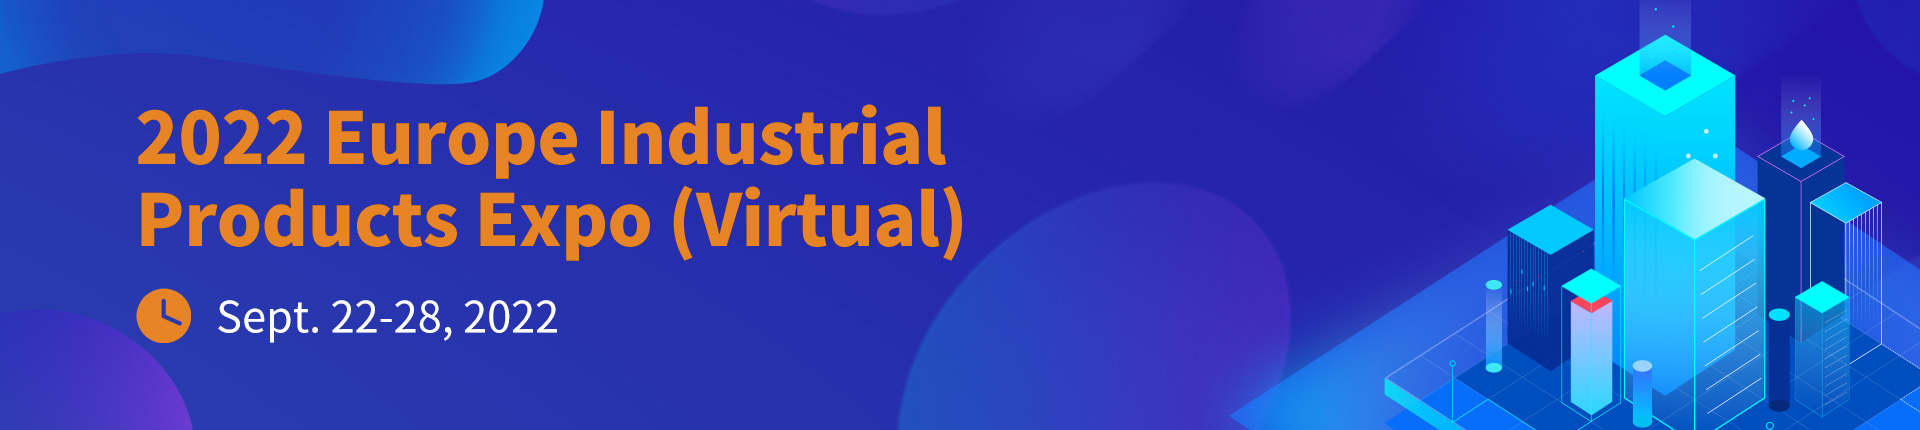 2022 Europe Industrial Products Expo (Virtual) 